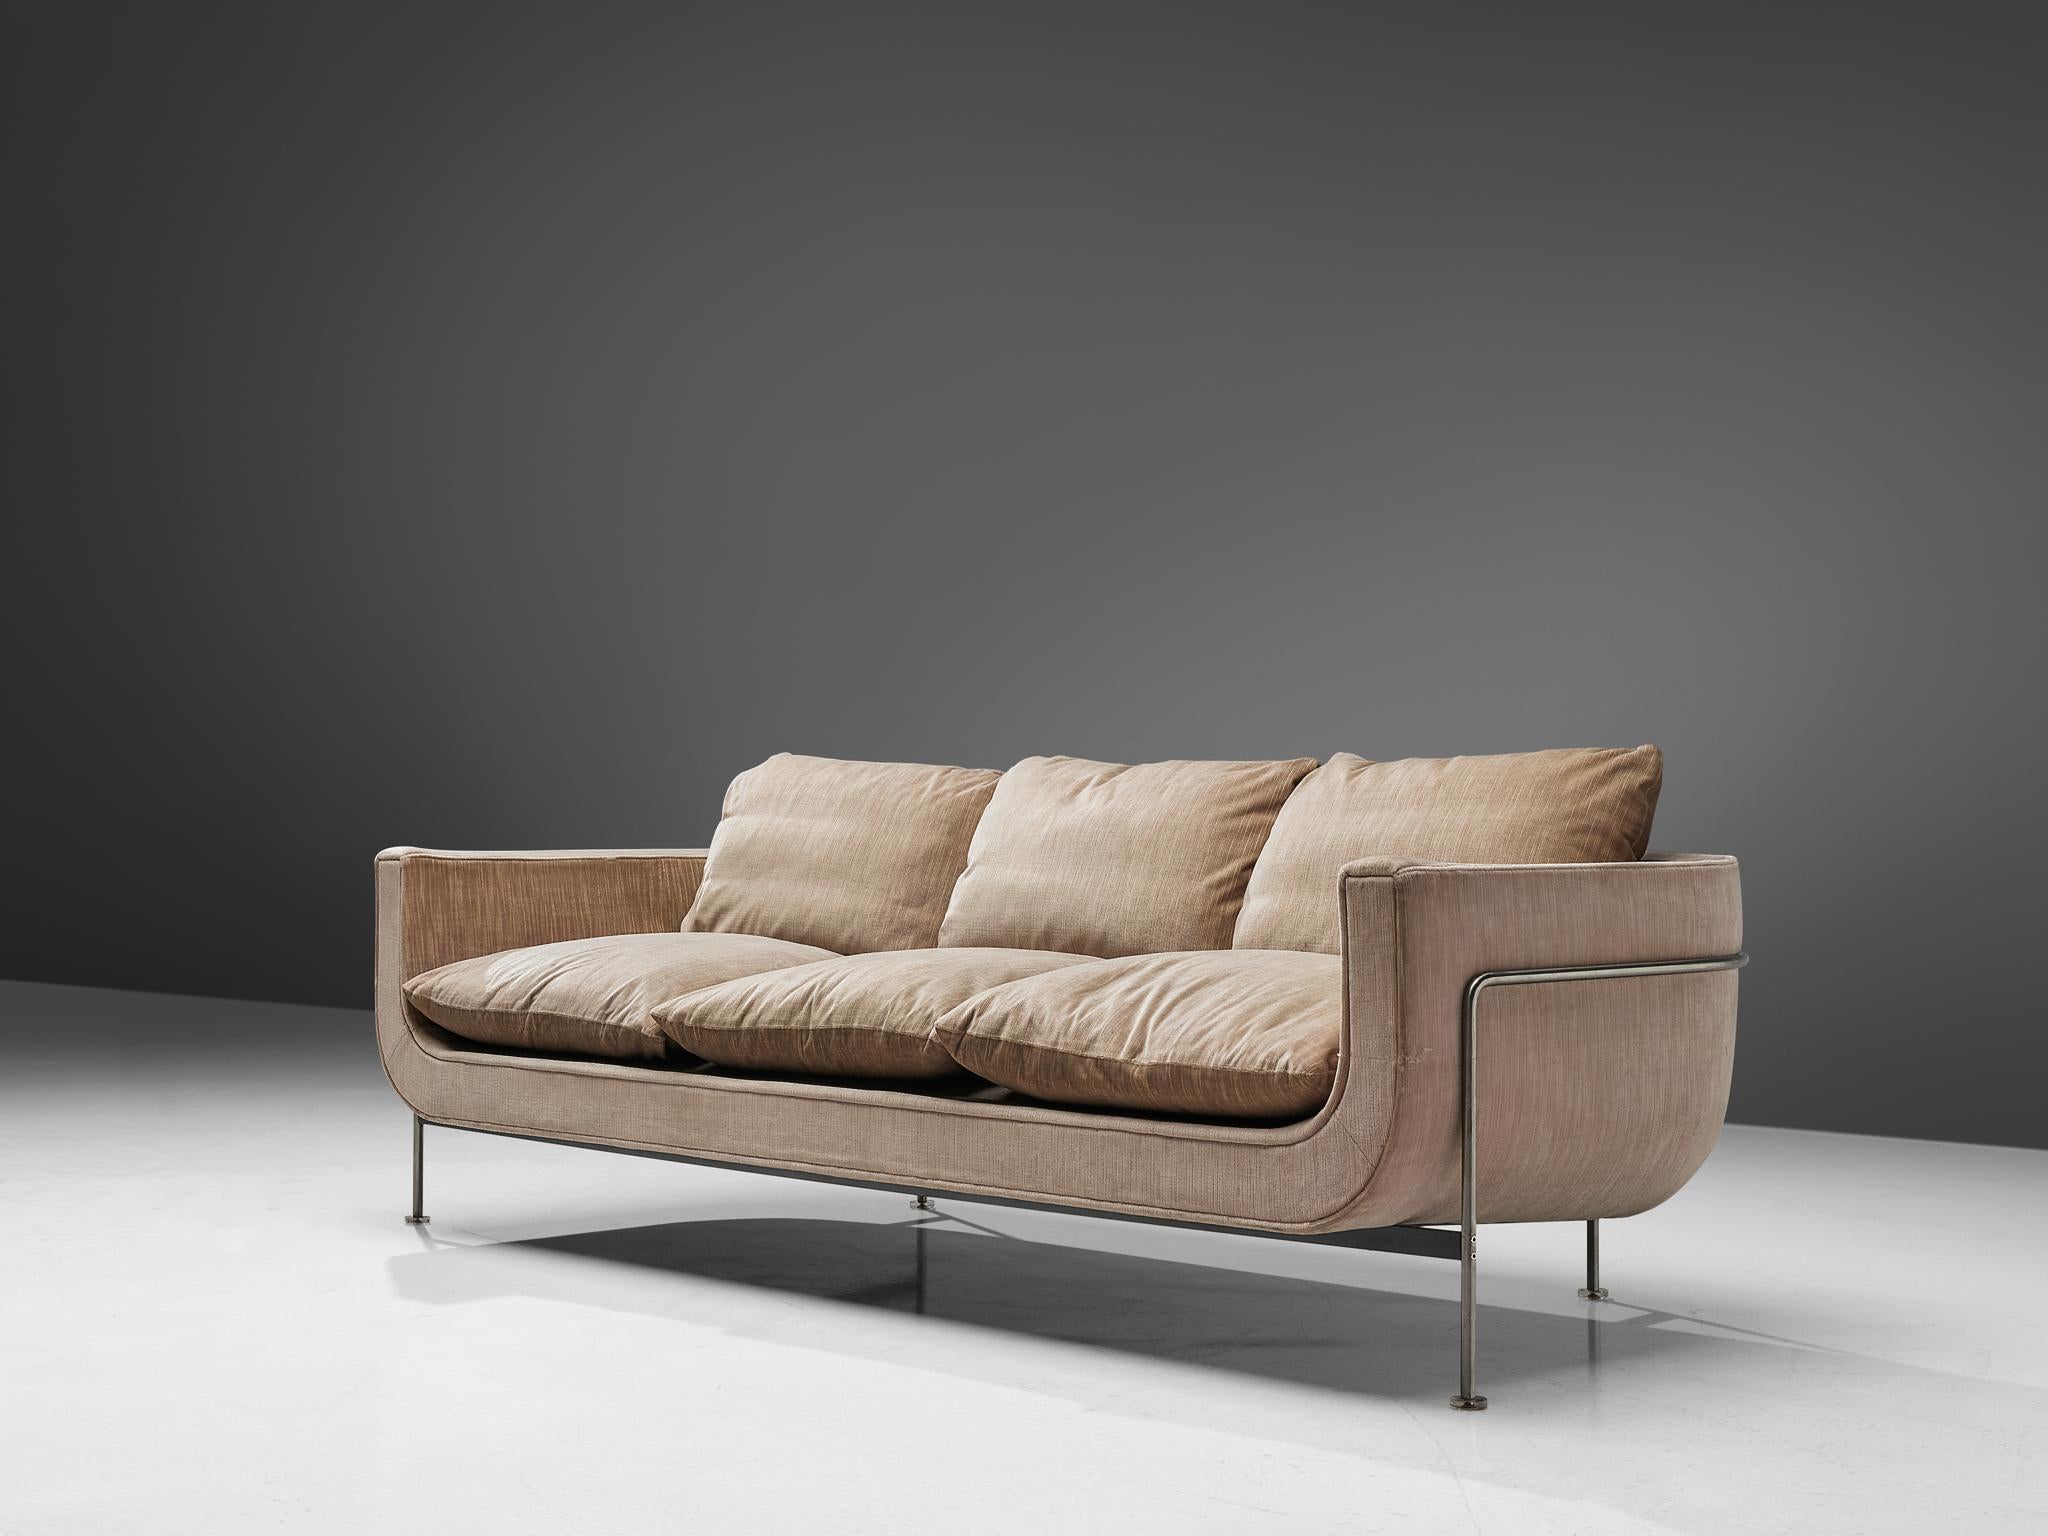 Jacques Brule, sofa to be reupholstered, metal wood and fabric, France, 1963.

An elegant sofa by Jacques Brule, featuring a seat that shows strong lines and curves. The seat is nicely balanced with clear and reounded edges. It's supported by the